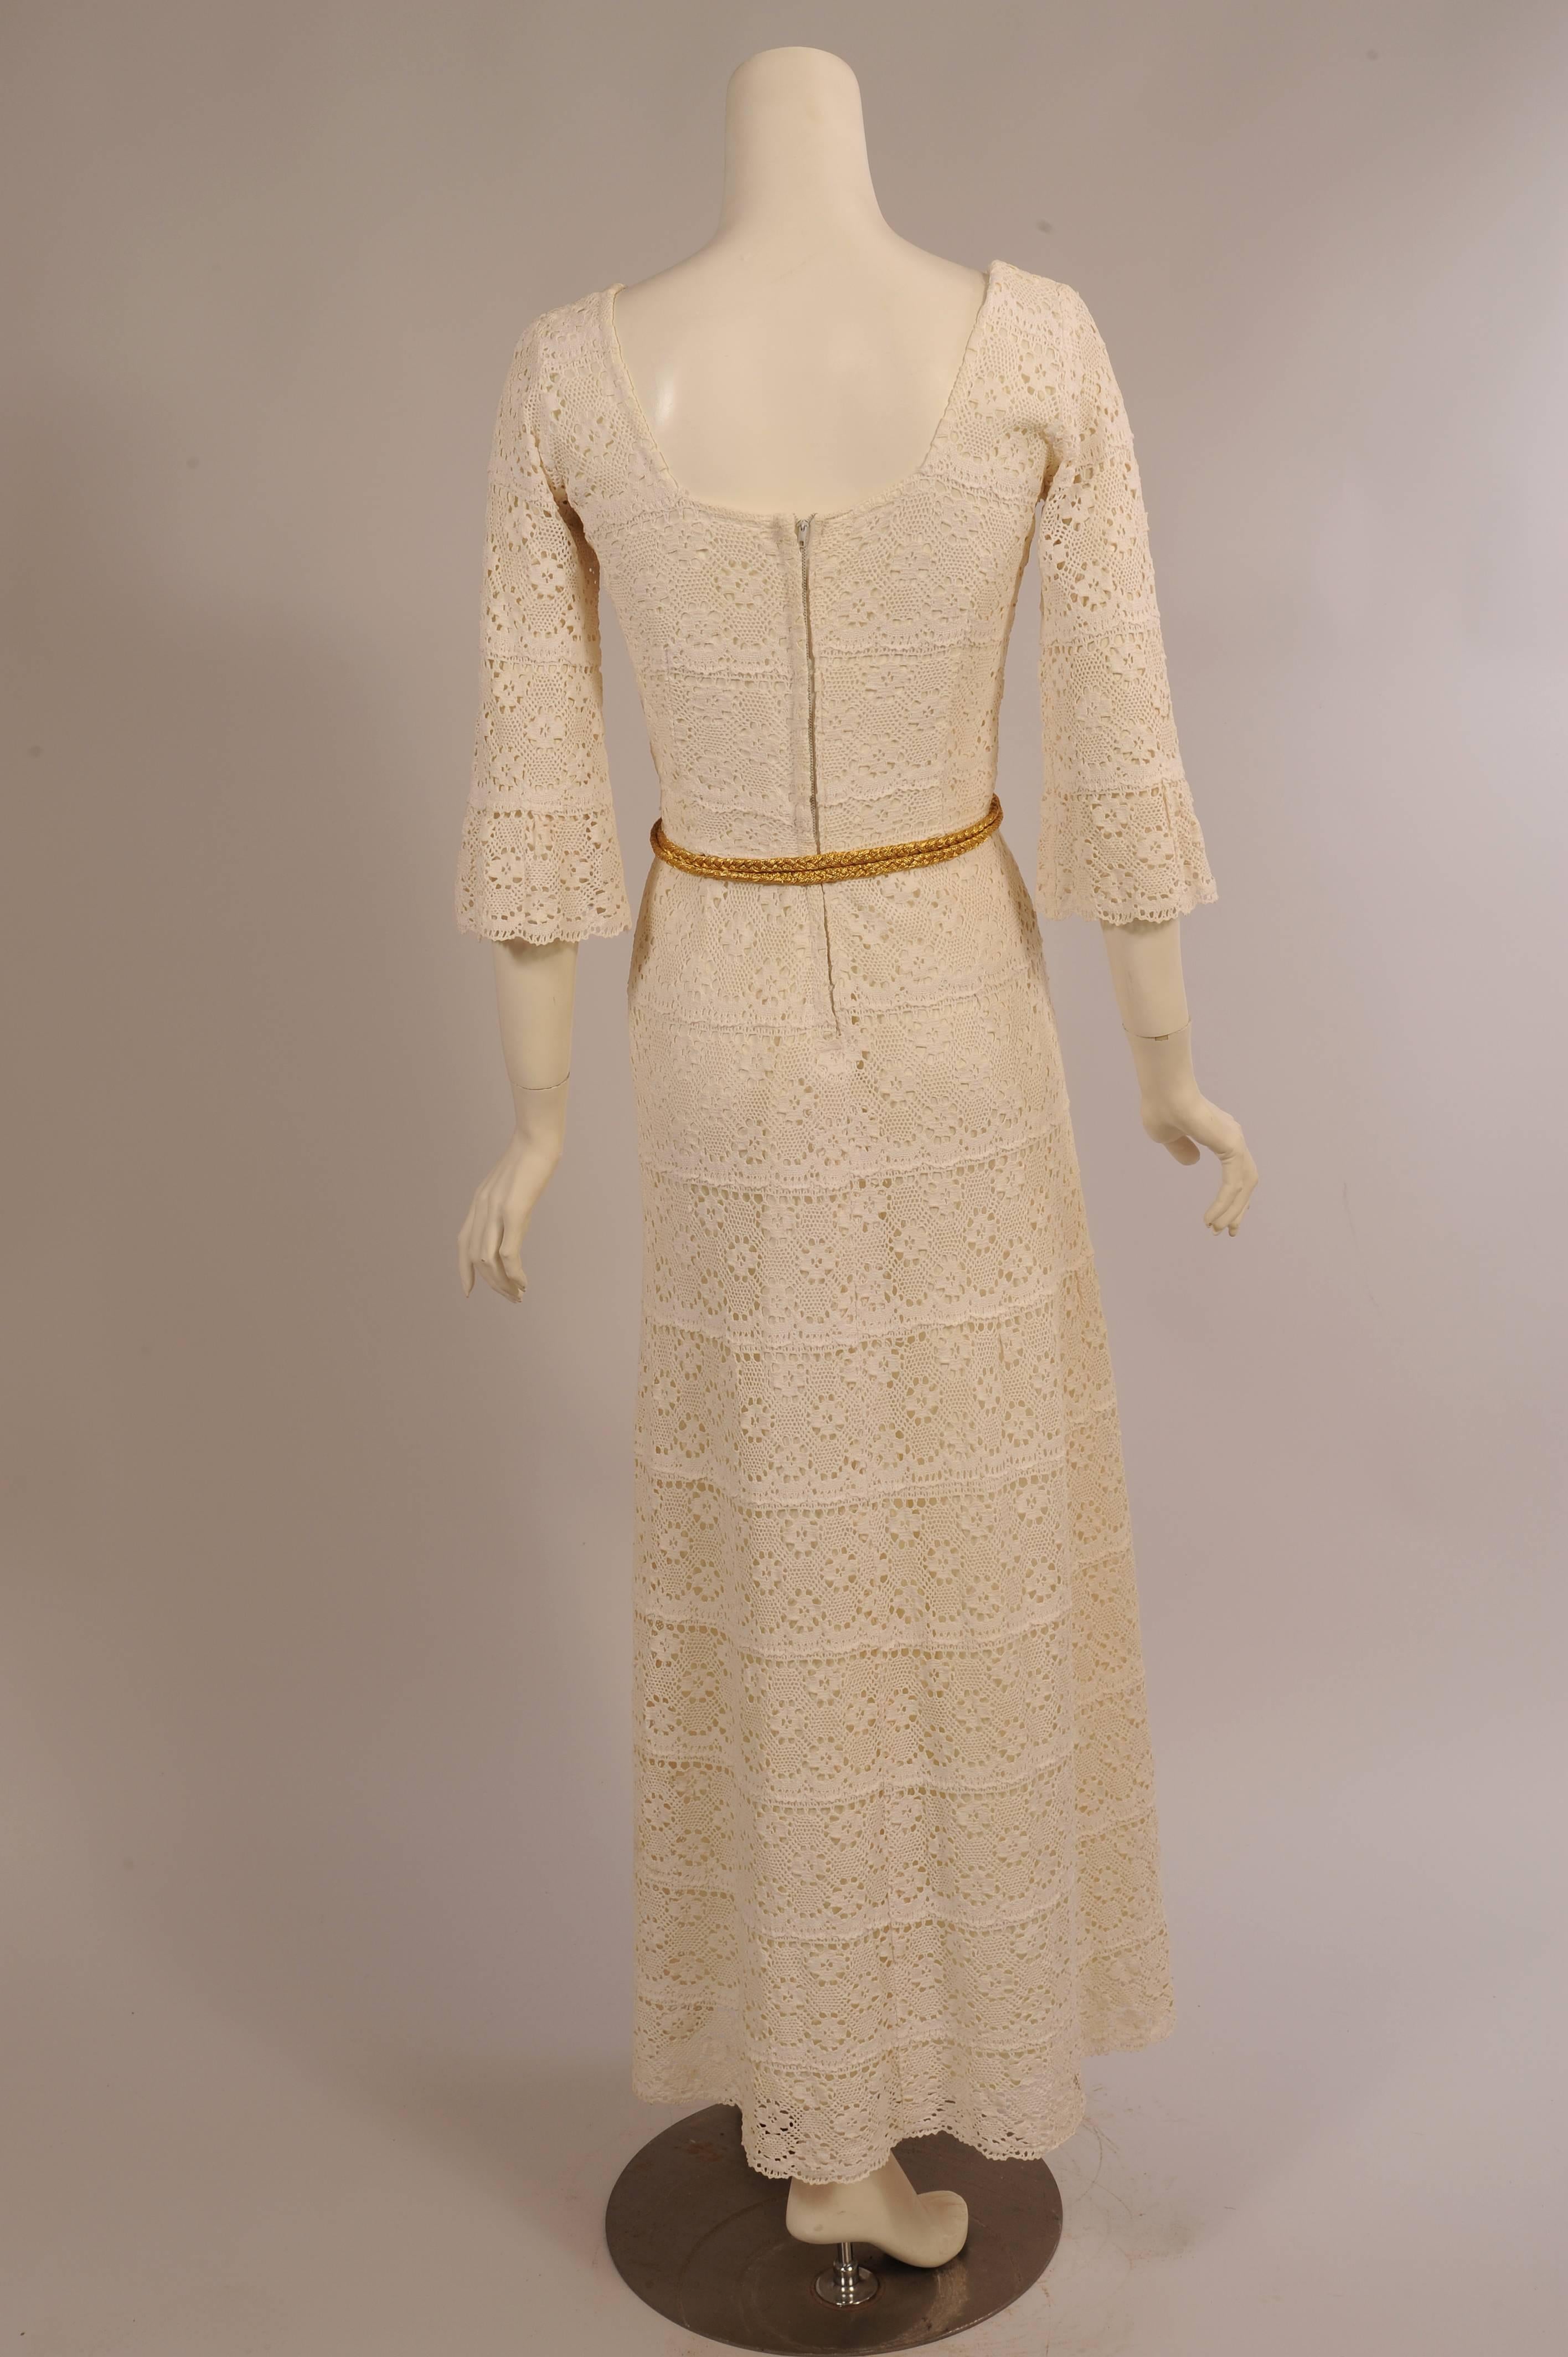 1970's Lace Maxi Dress with Braided Metallic Gold Belt In Excellent Condition For Sale In New Hope, PA